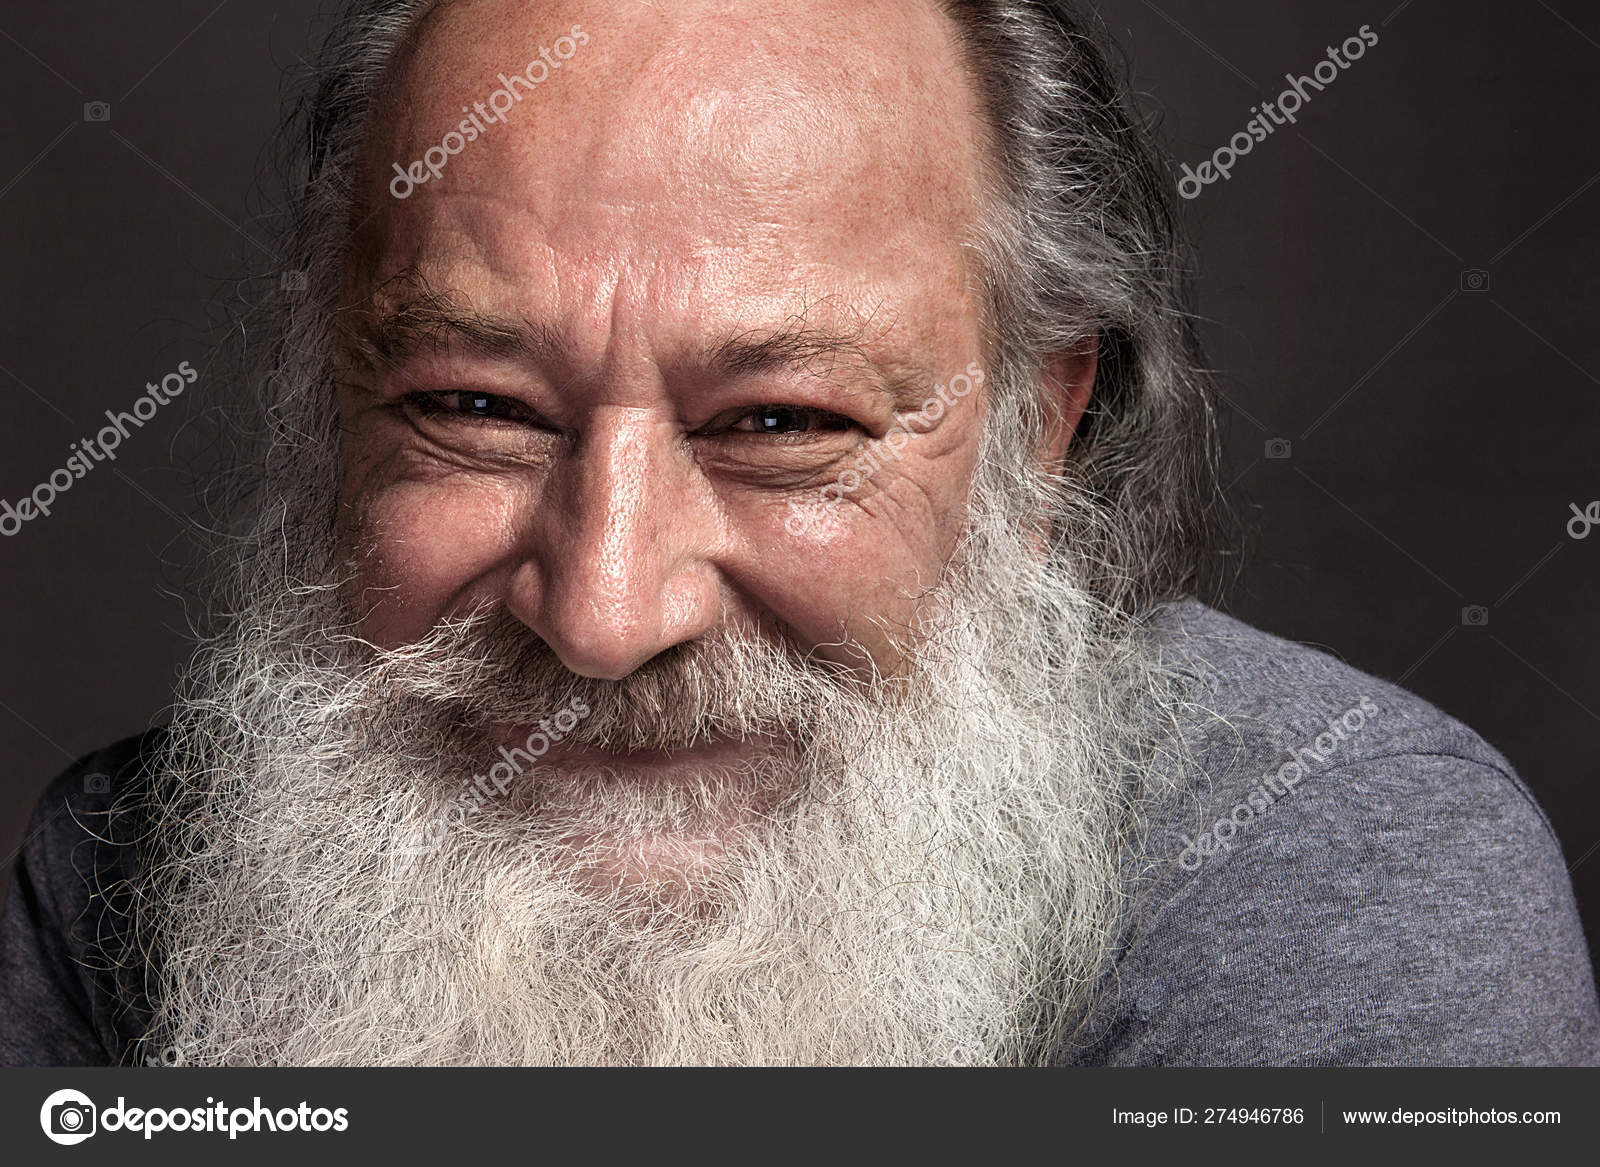 A Gray Haired Old Man Of Sixty Seventy With Long Gray Hair